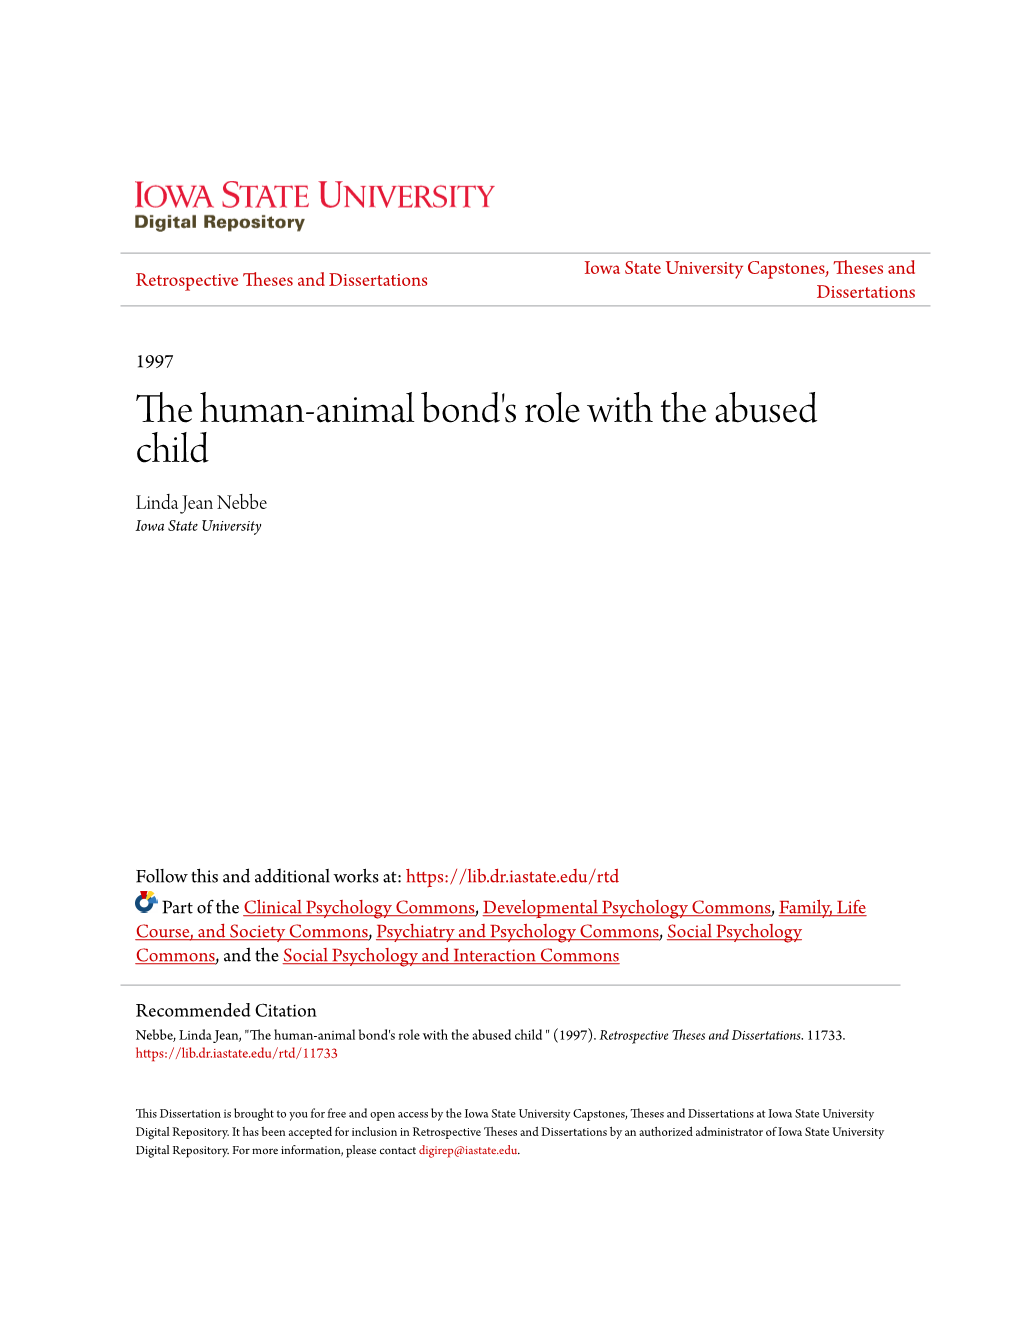 The Human-Animal Bond's Role with the Abused Child